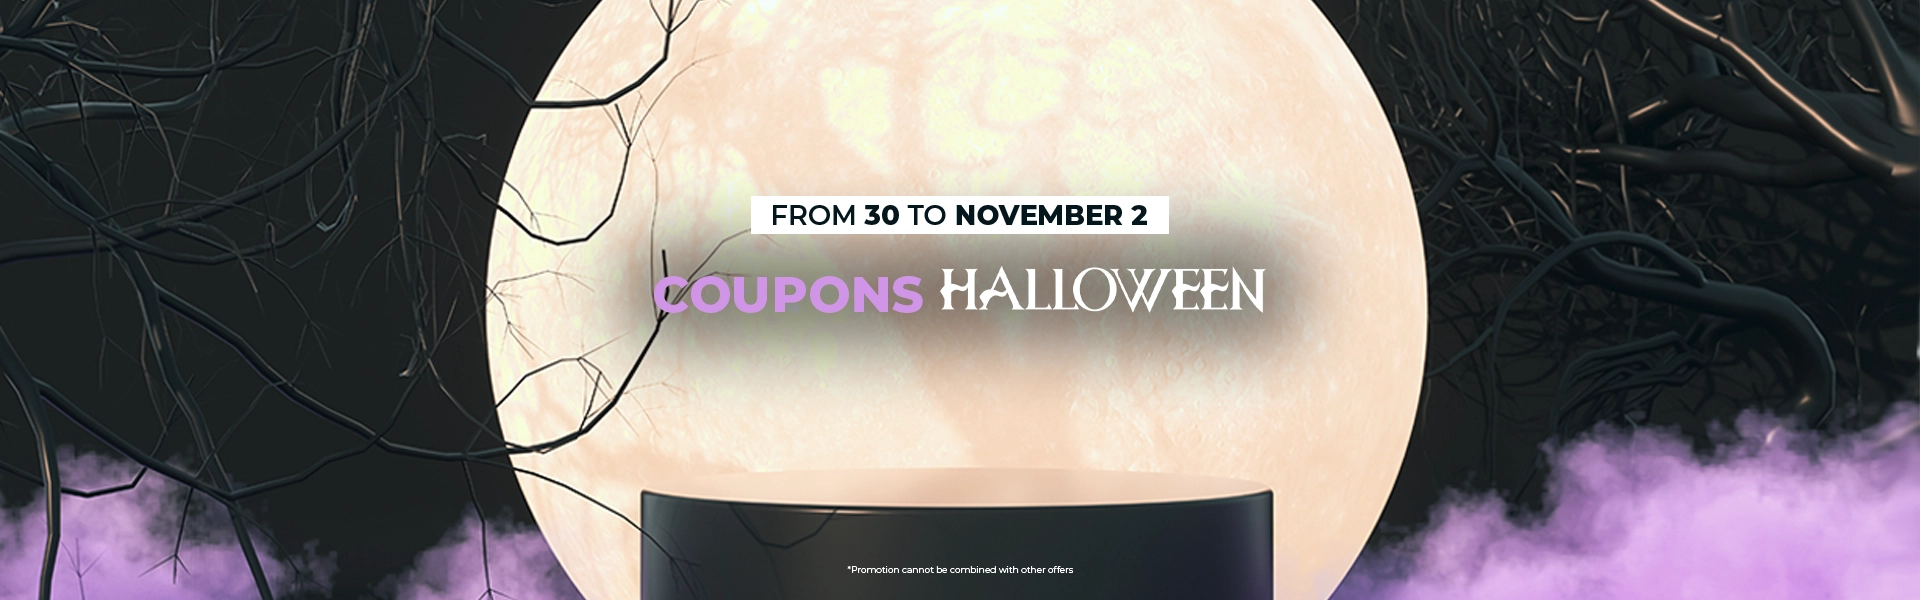 Save up to €15 with our Halloween coupons